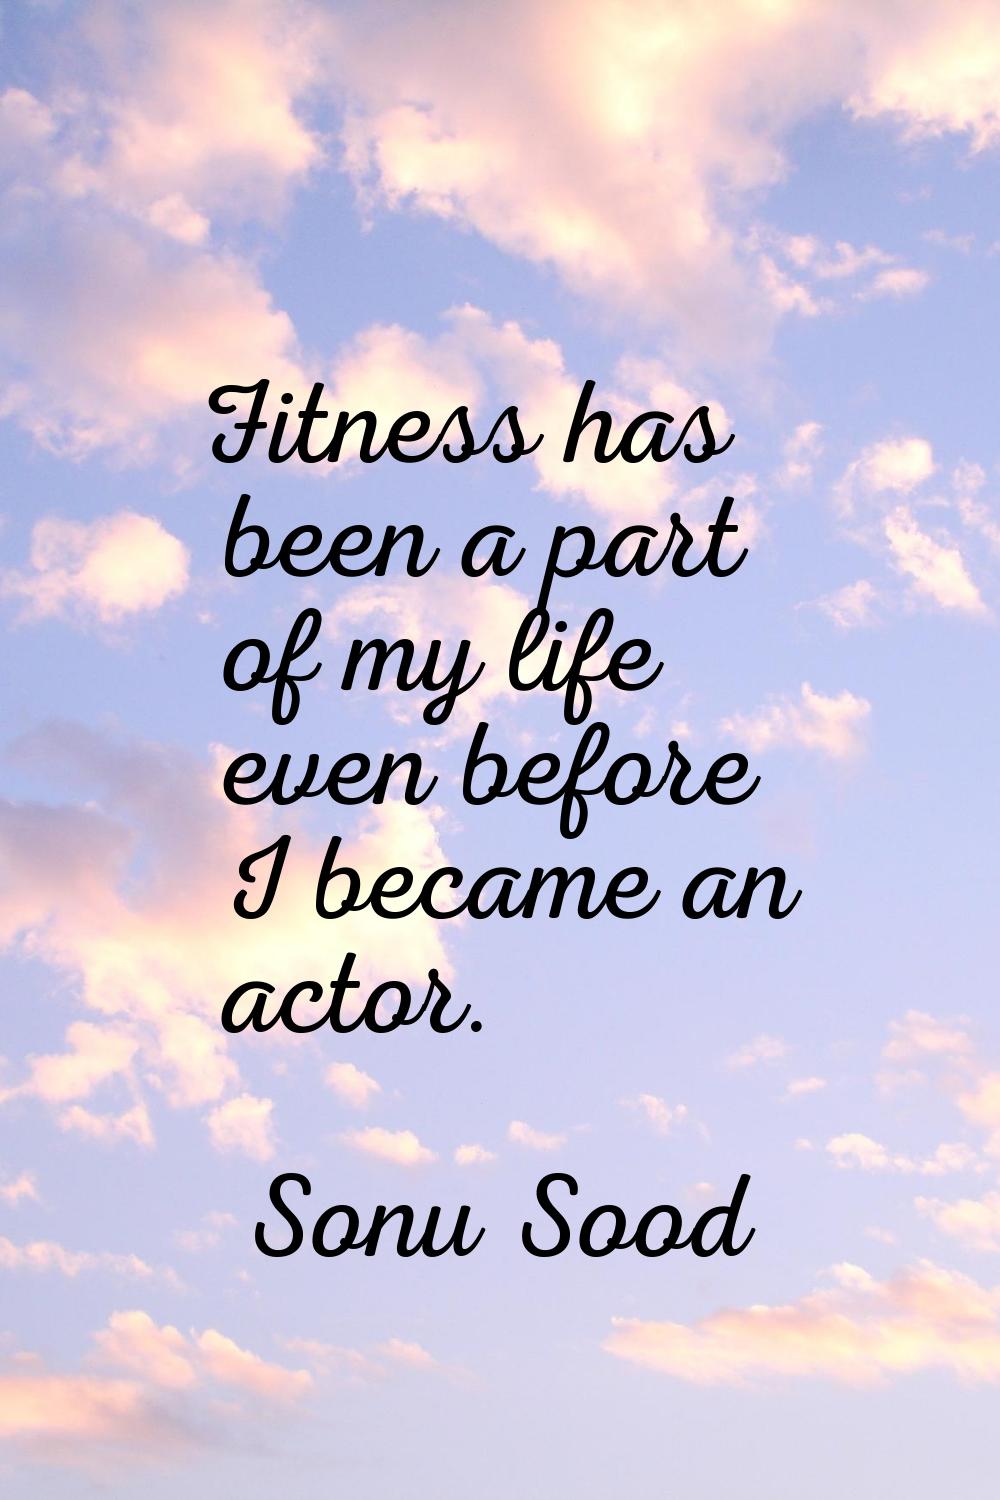 Fitness has been a part of my life even before I became an actor.